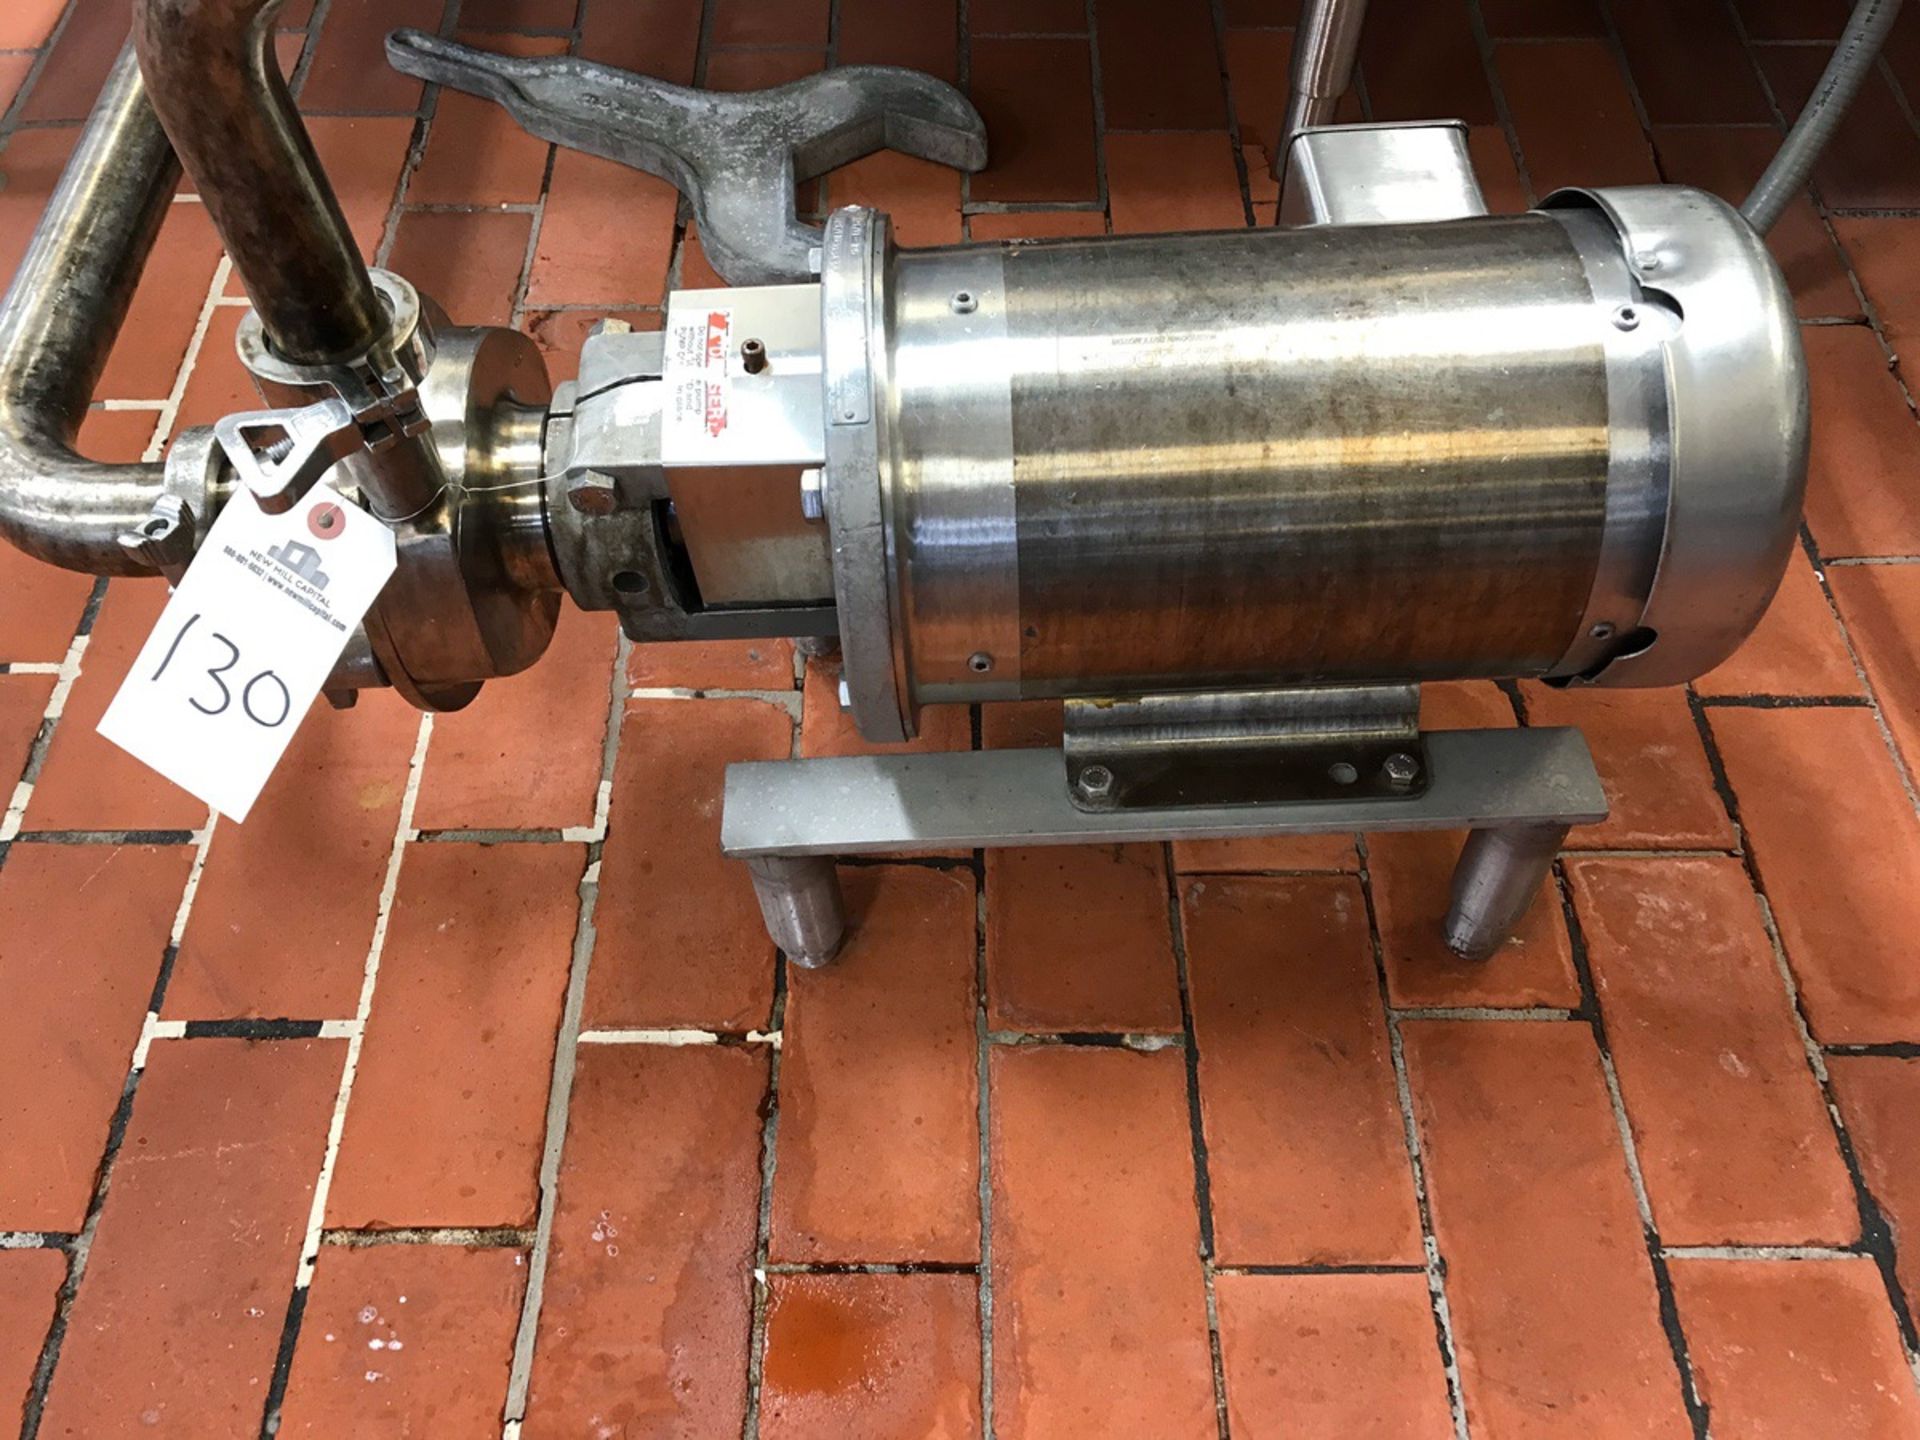 Fristam Centrifugal Pump, Stainless Steel Motor, 2in inlet, 1.5in Outlet, Model F | Rig Fee: $50